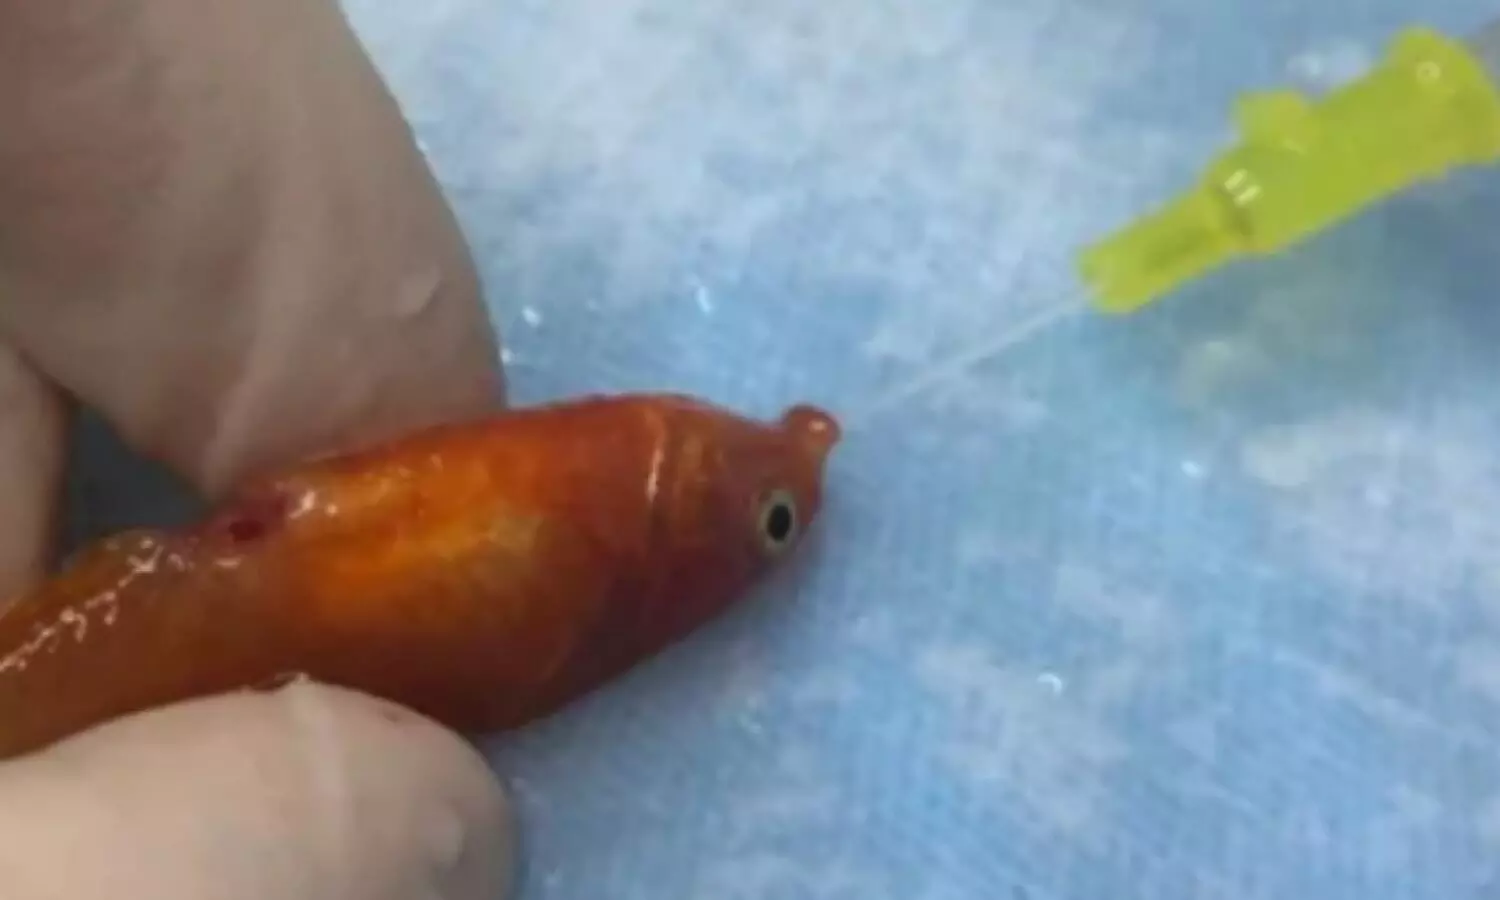 Tumor removed from stomach of fish